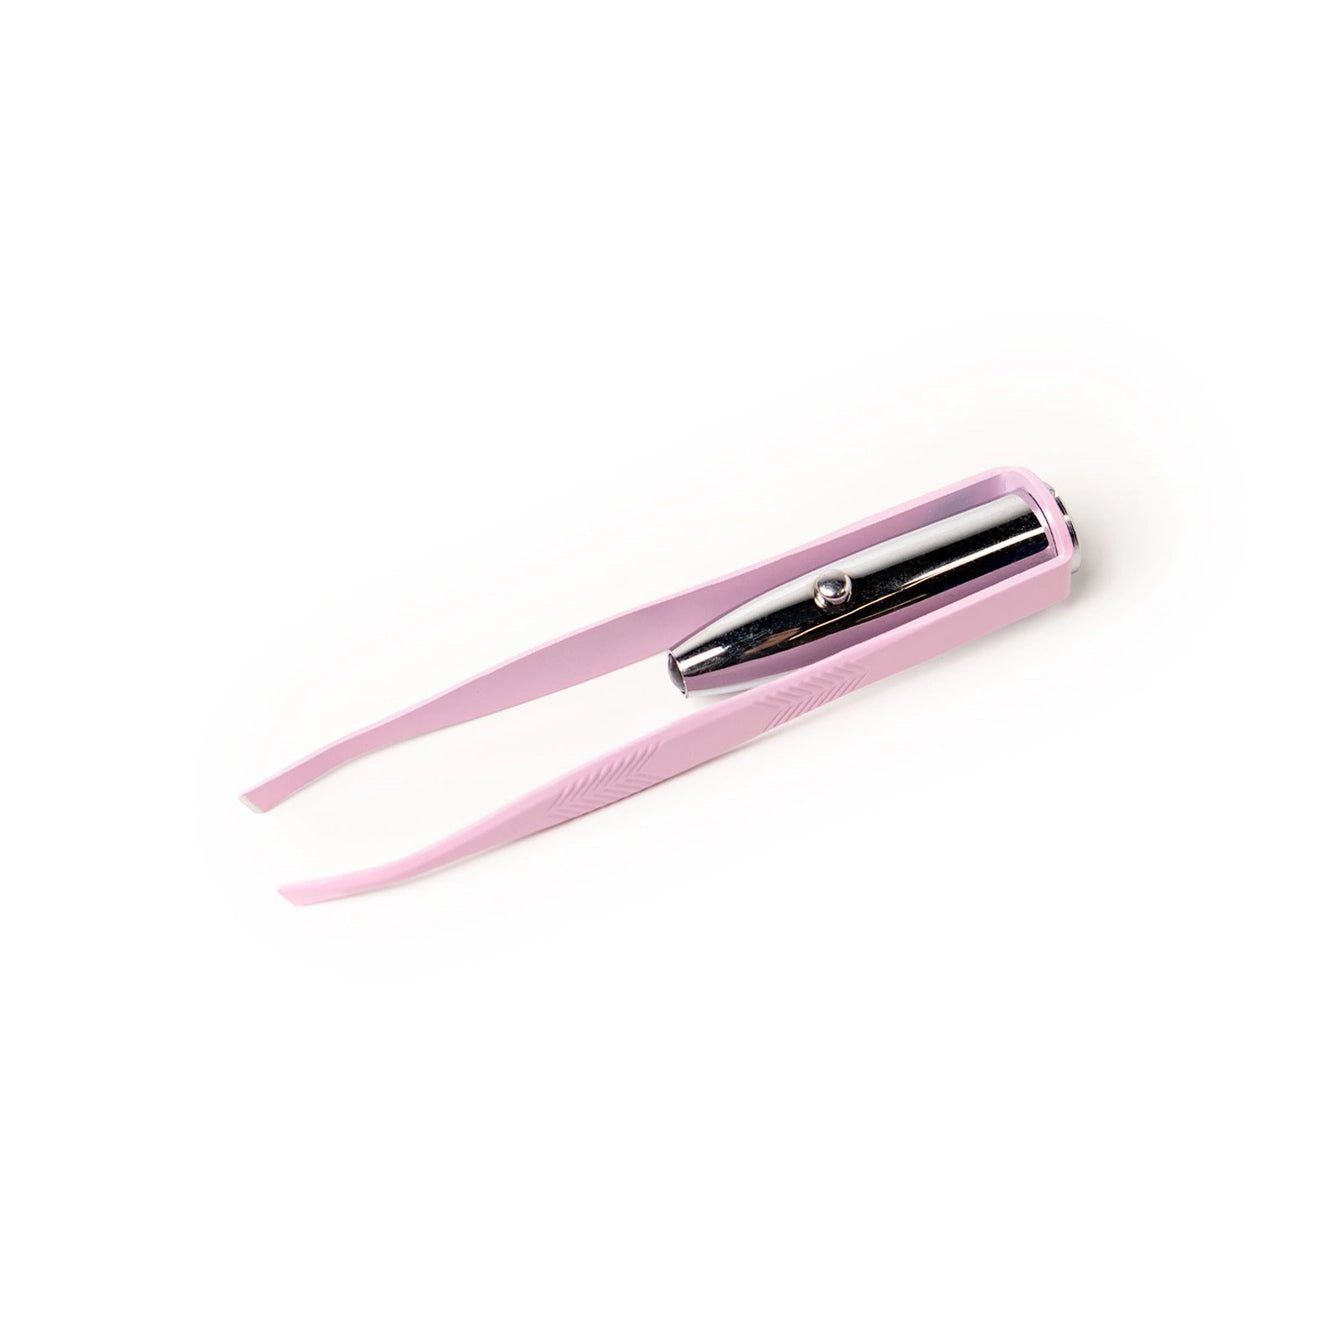 Precision grip tweezers t Targeted LED beam Easy & precise grooming Push button on/off Batteries included lavender color